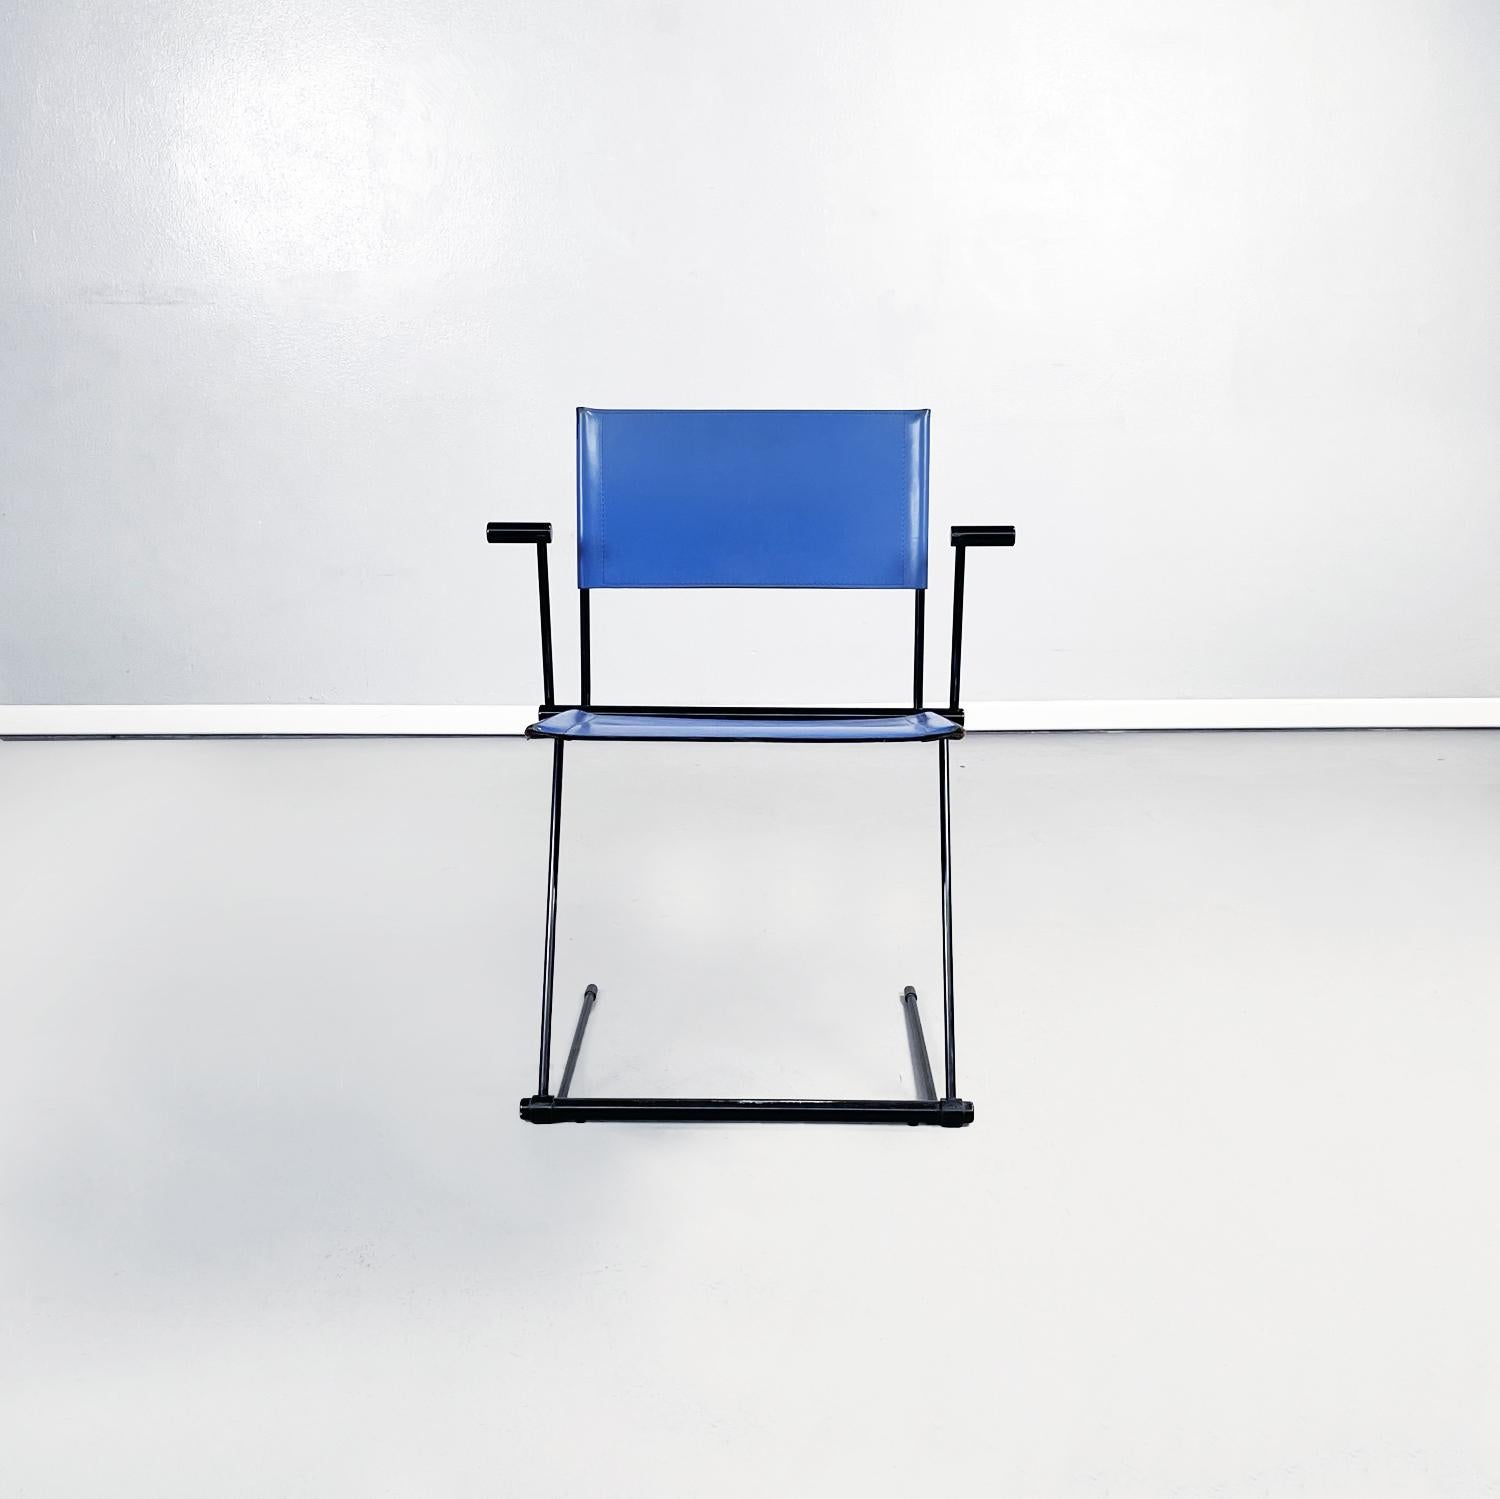 Italian modern Blue leather Chairs Ballerina Herbert Ohl Matteo Grassi, 1991
Set of 6 chairs mod. Ballerina with seat and back in blue leather. The structure is in black painted tubular aluminum. Stackable.
Produced by Matteo Grassi in 1990s and